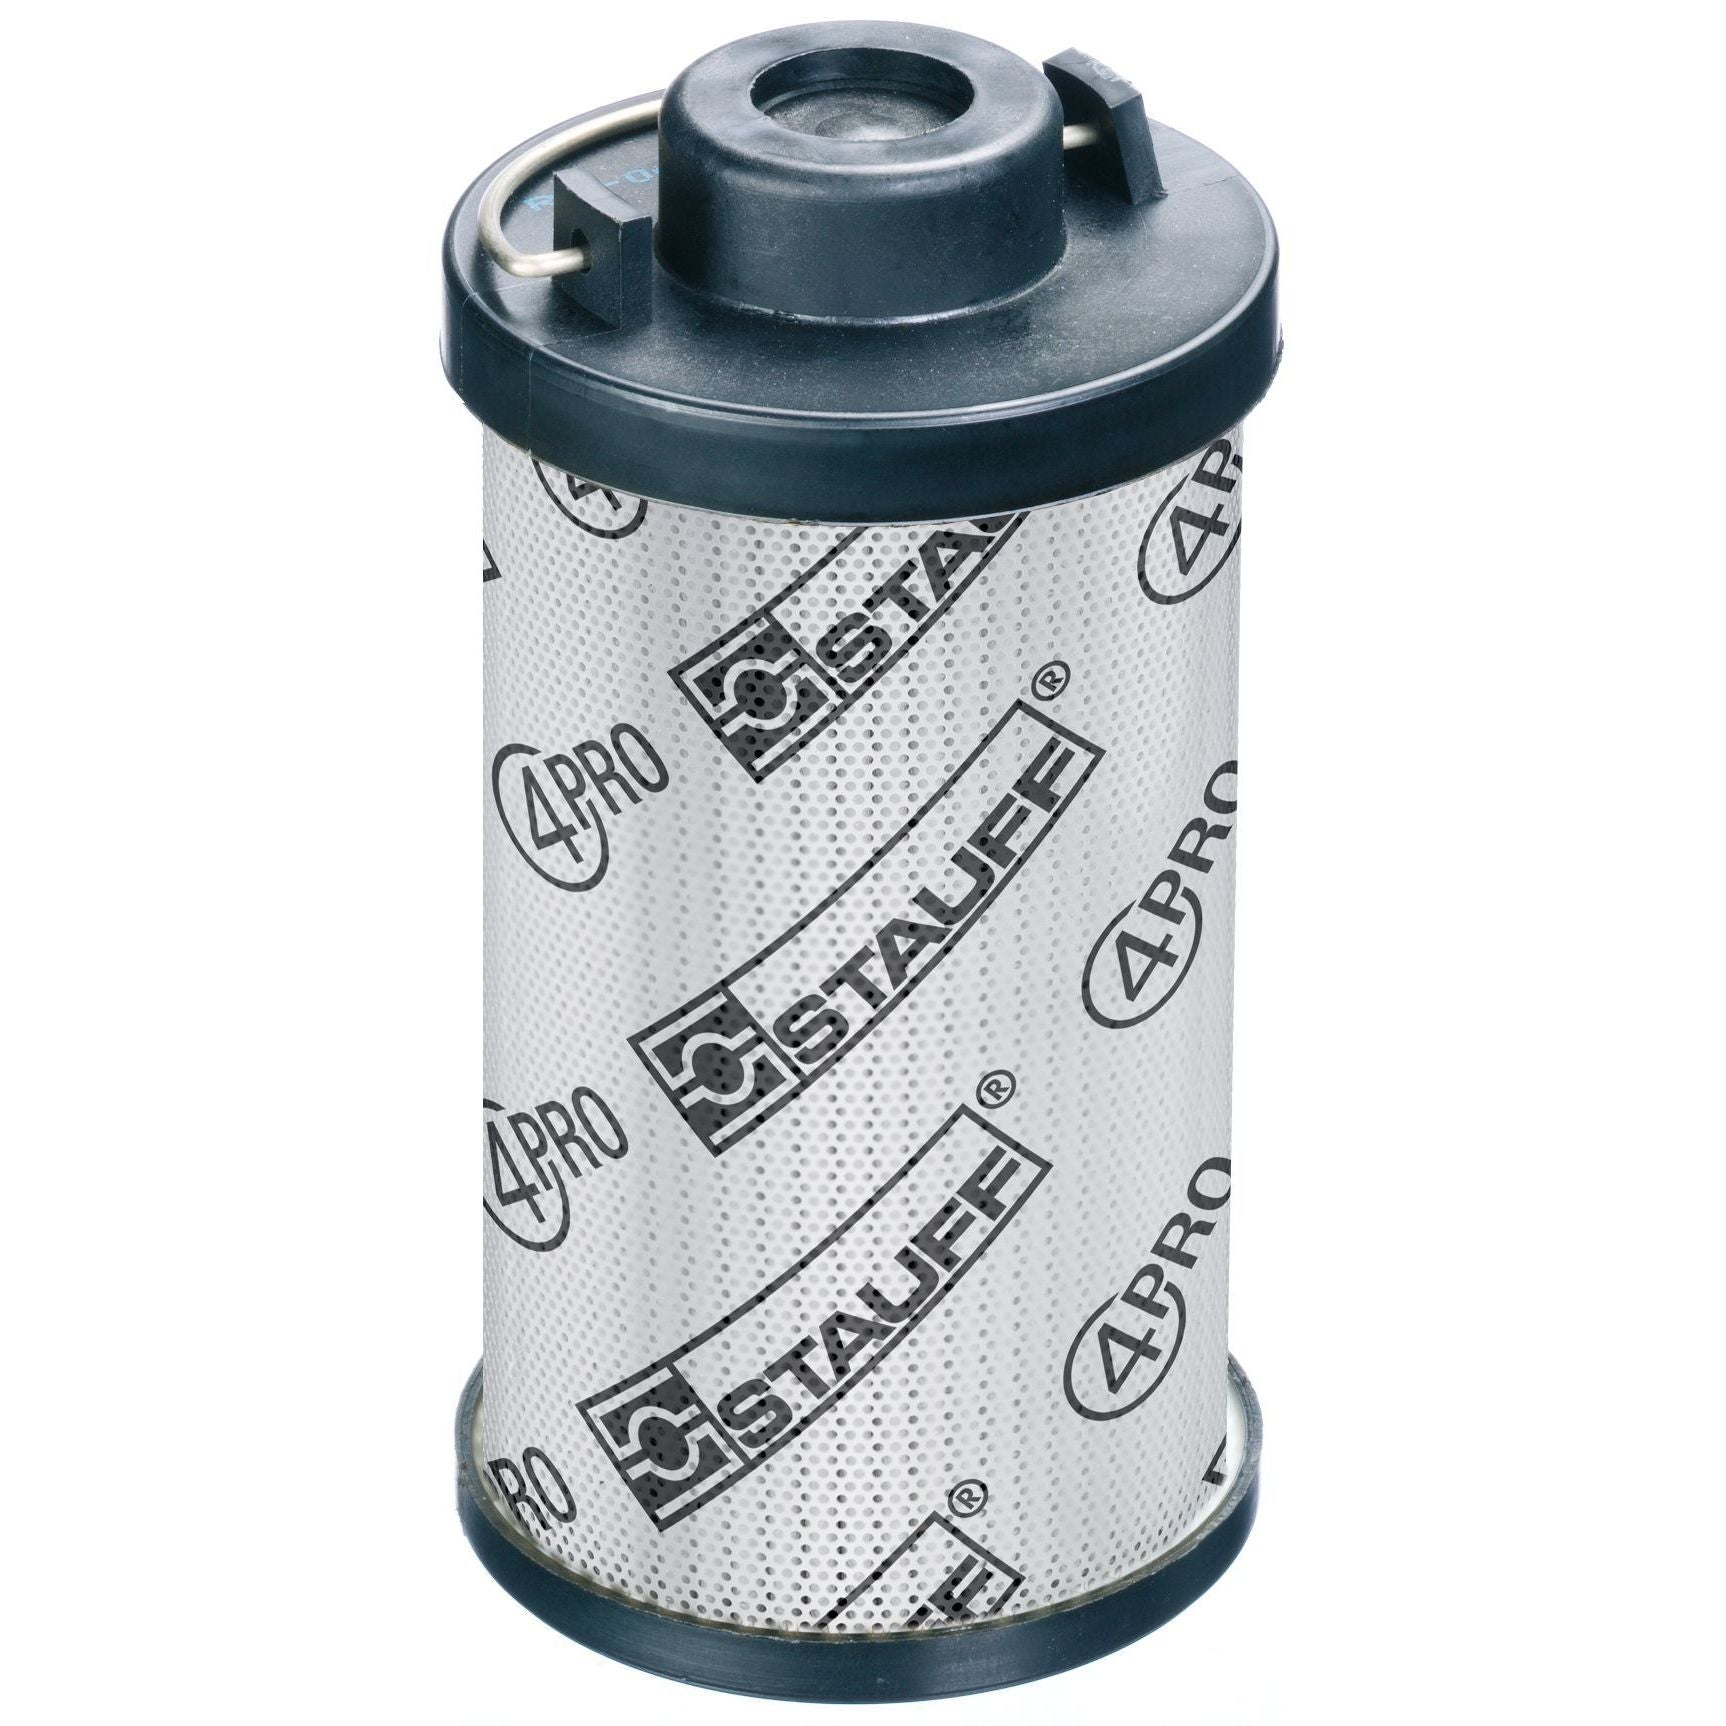 RE-250-G-10-B-B3/4 : Stauff RF-250 Series Filter Element, 10 Micron, Synthetic, 363psi Collapse Differential, Buna